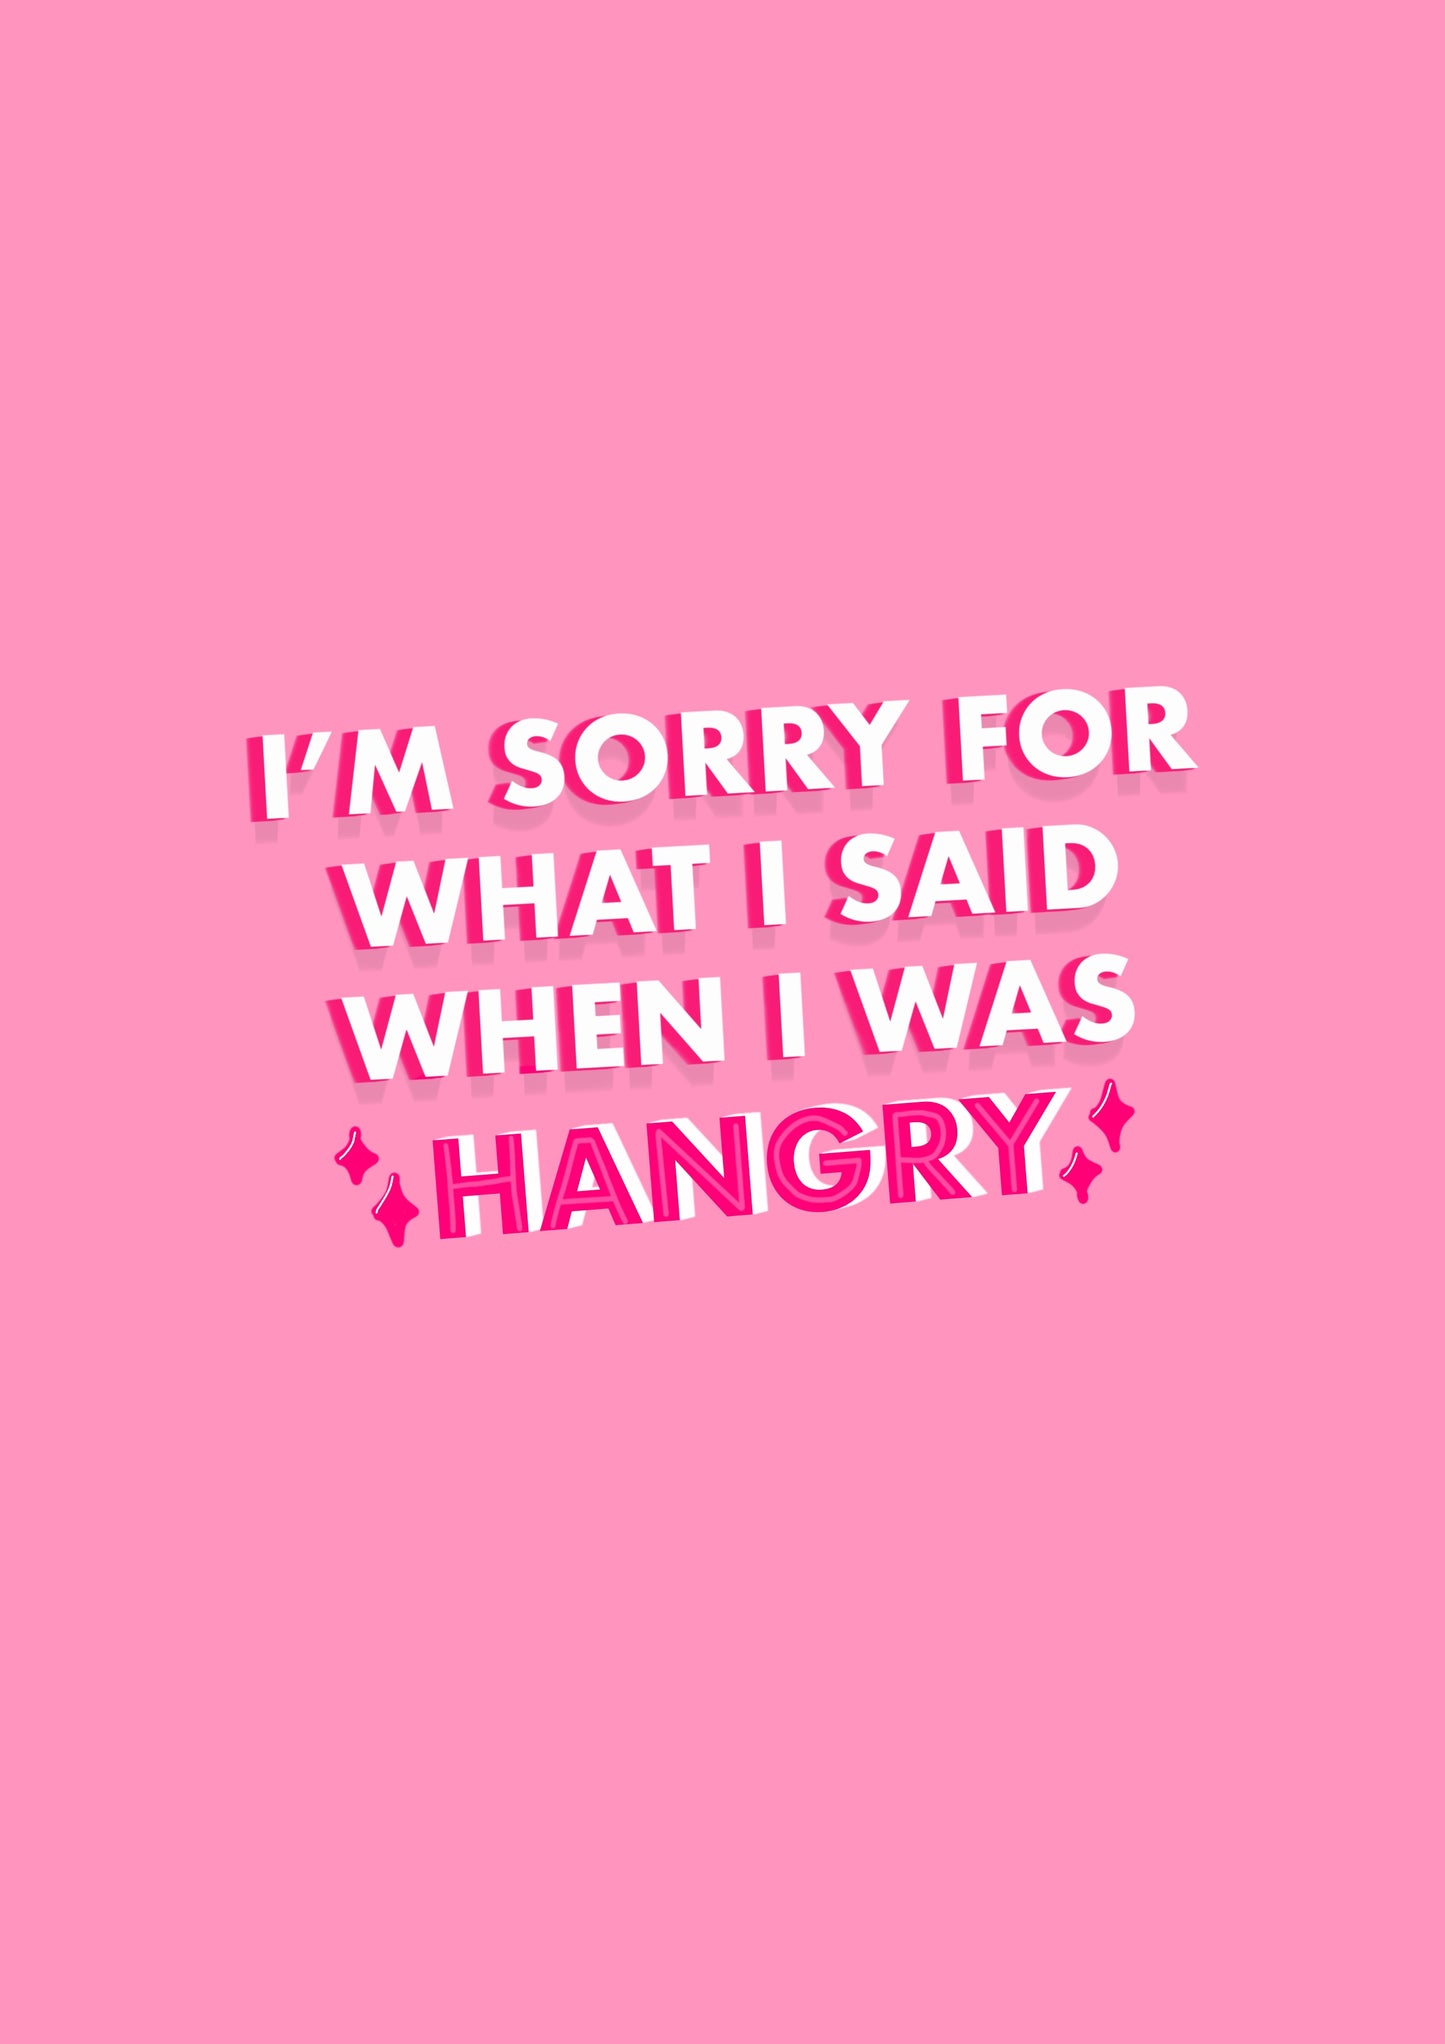 I'm sorry for what I said when I was hangry Funny Quote Print